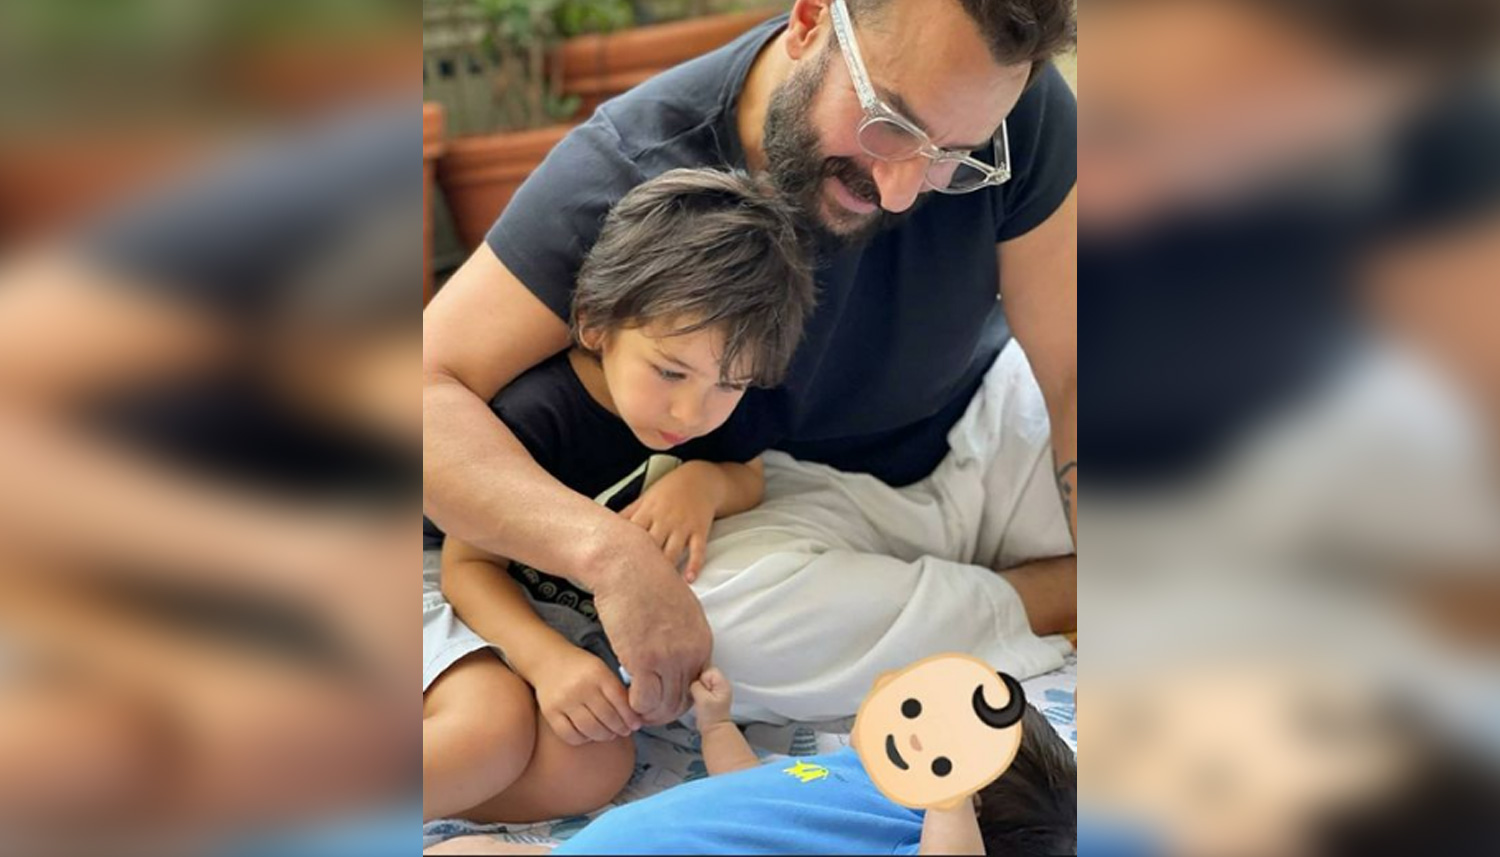 Kareena Kapoor shares her typical weekend with Saif Ali Khan, sons